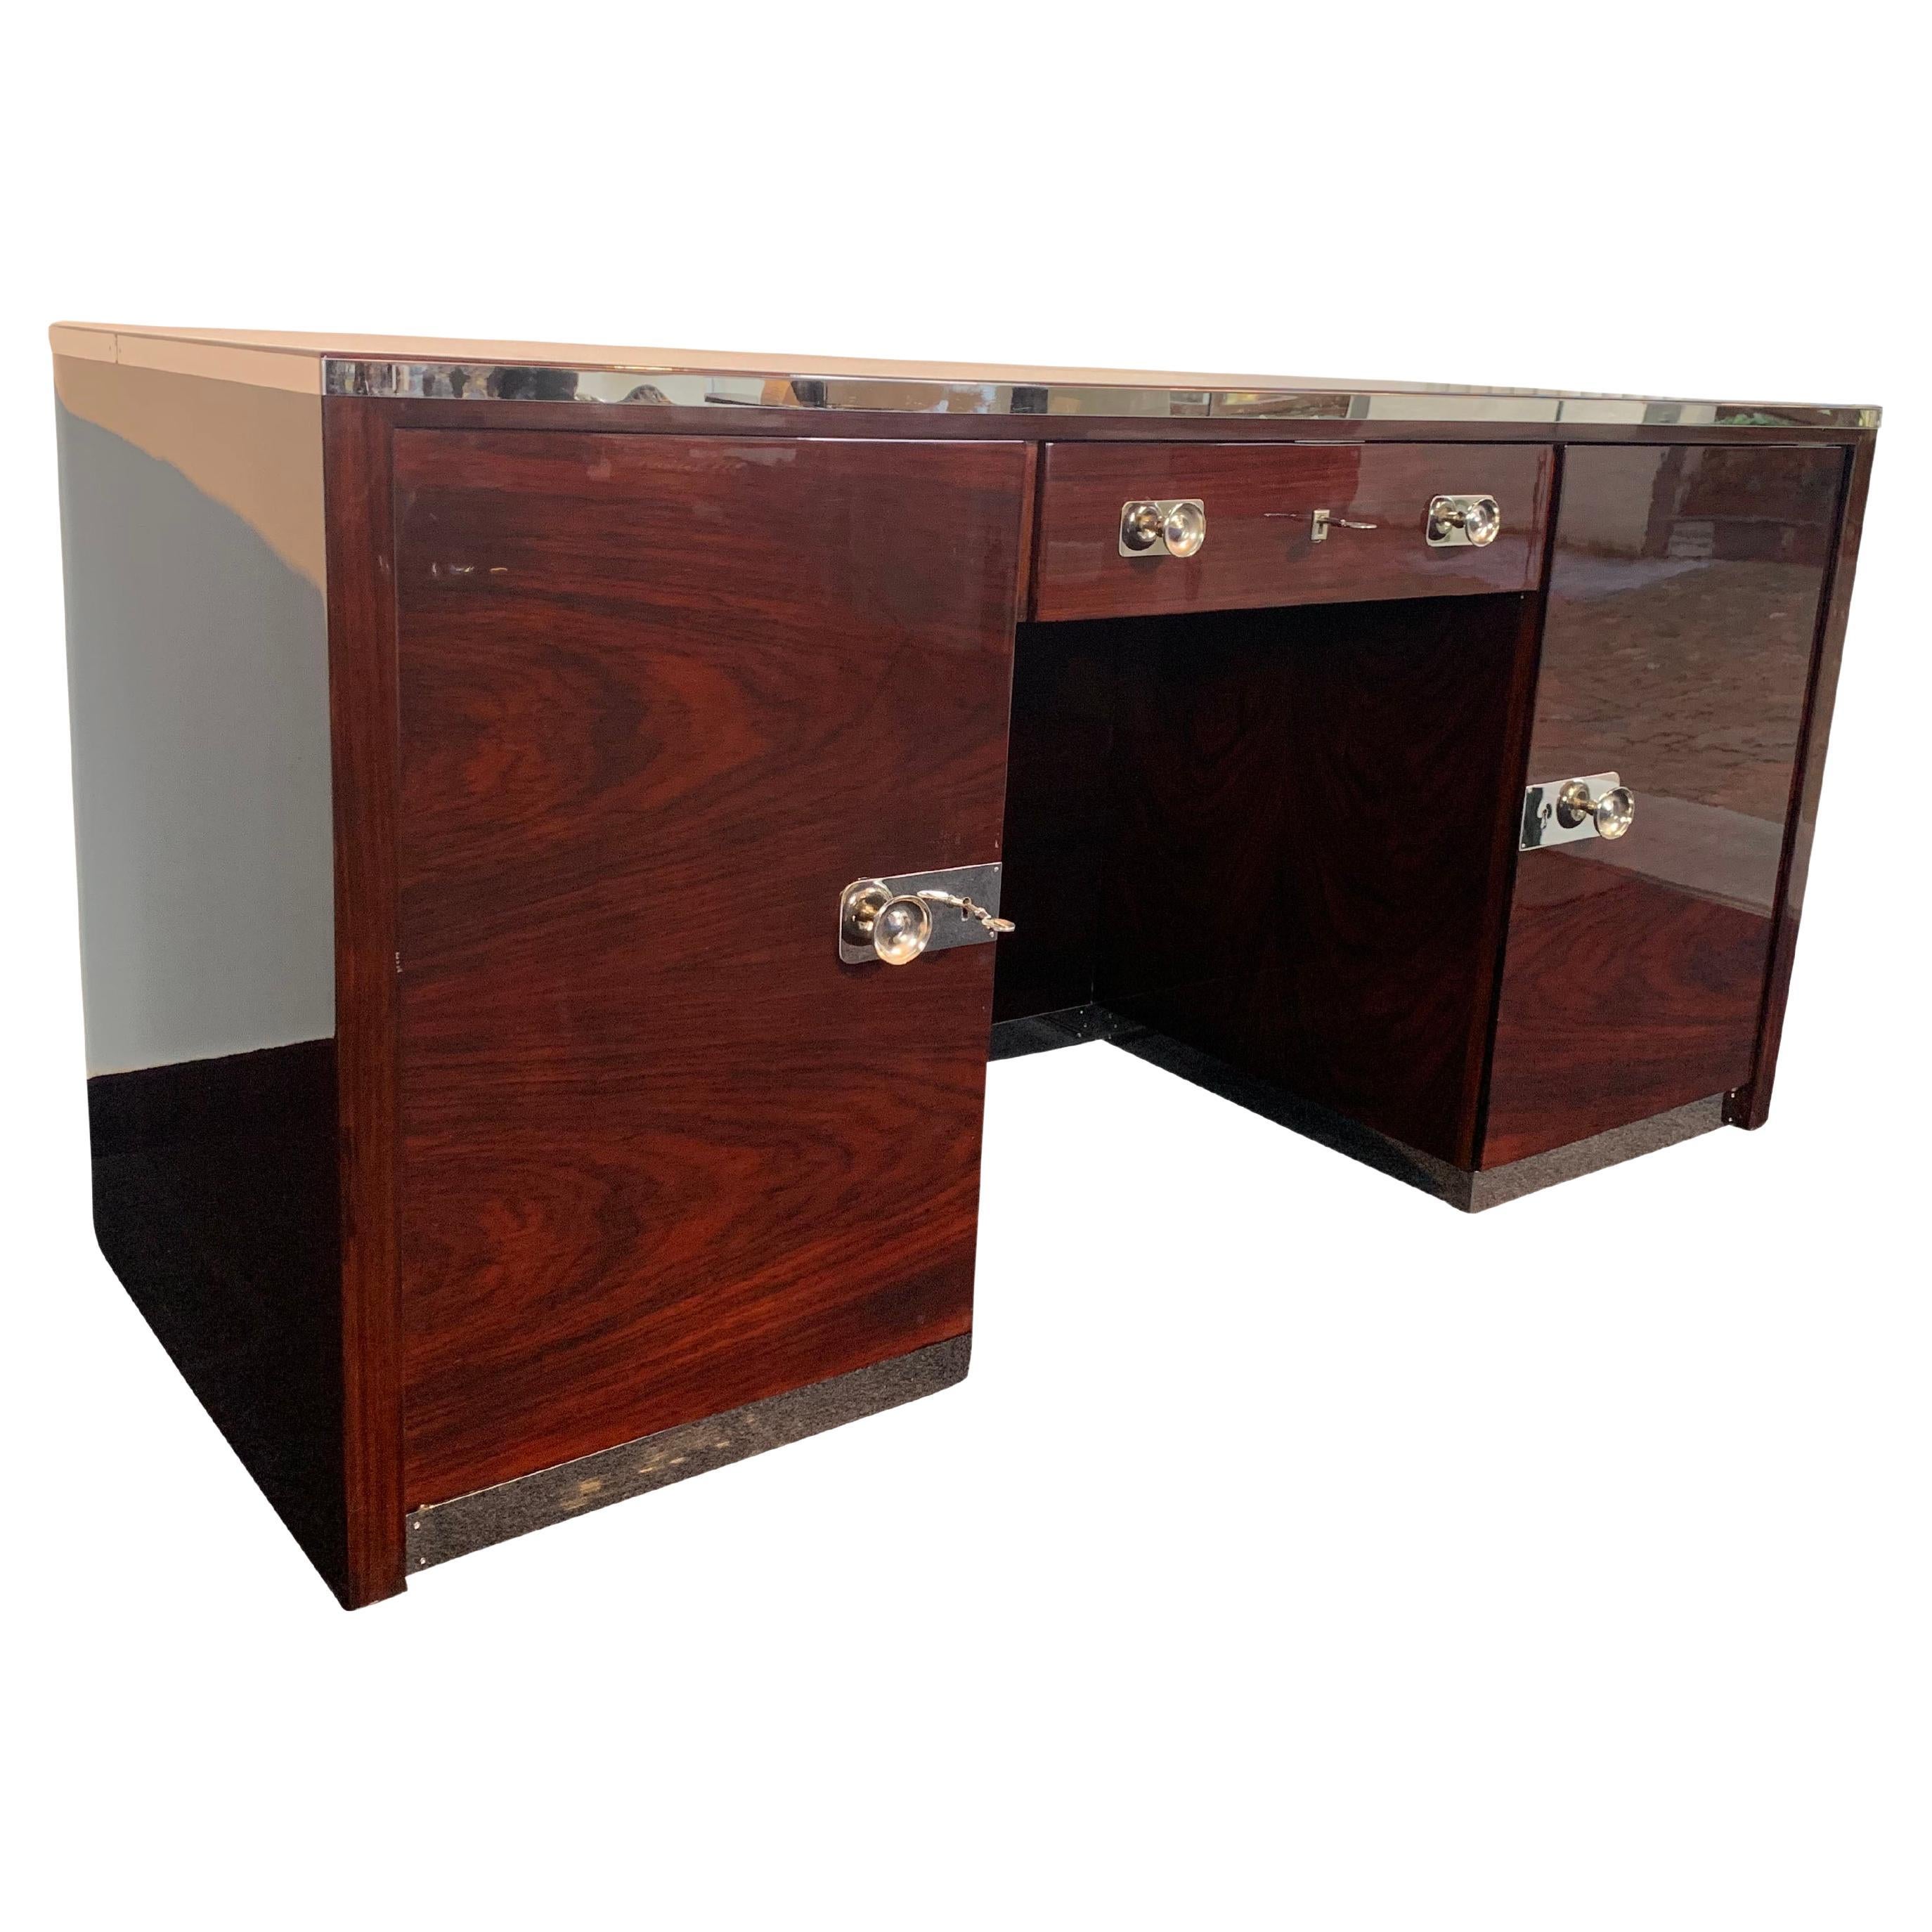 Original, fully restored Bauhaus Executive Desk, attributed to Erich Diekmann, Germany, 1923-1925 at the Bauhaus in Weimar.
Wonderful rosewood / Palisander veneer with excellent piano lacquer finish.
Inside in bright maple in satin finish and